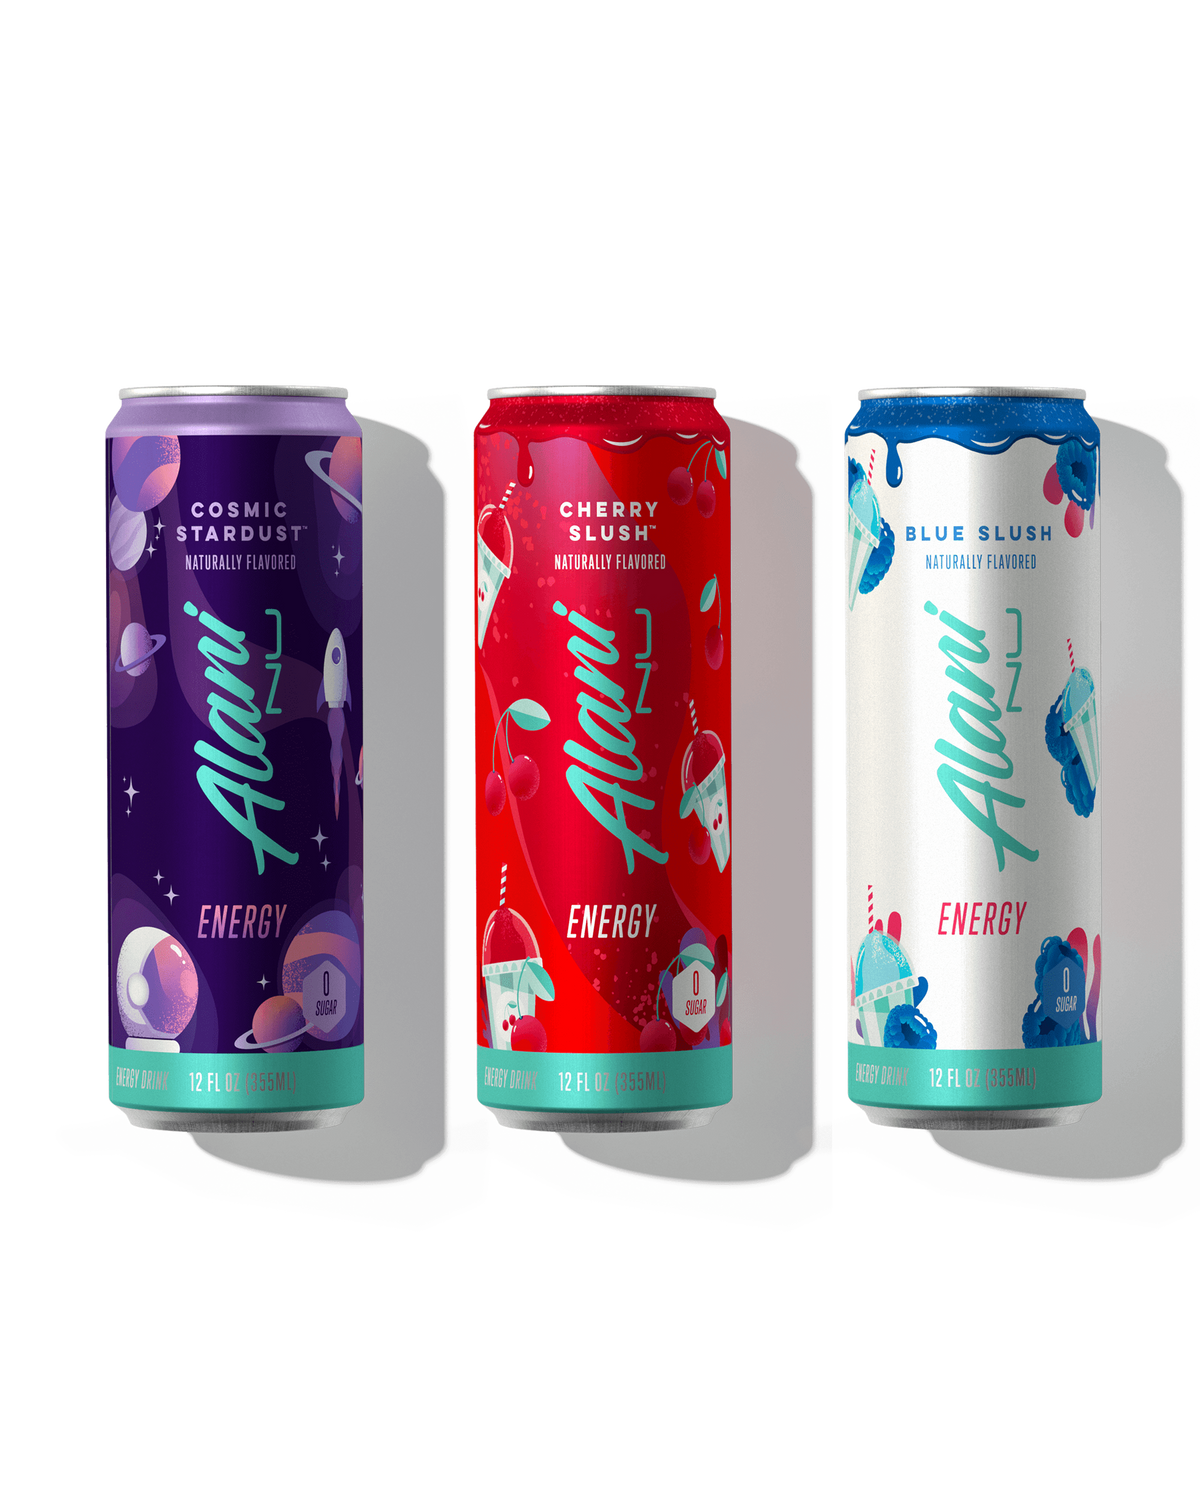 Energy Drink in Electric Energy flavors.